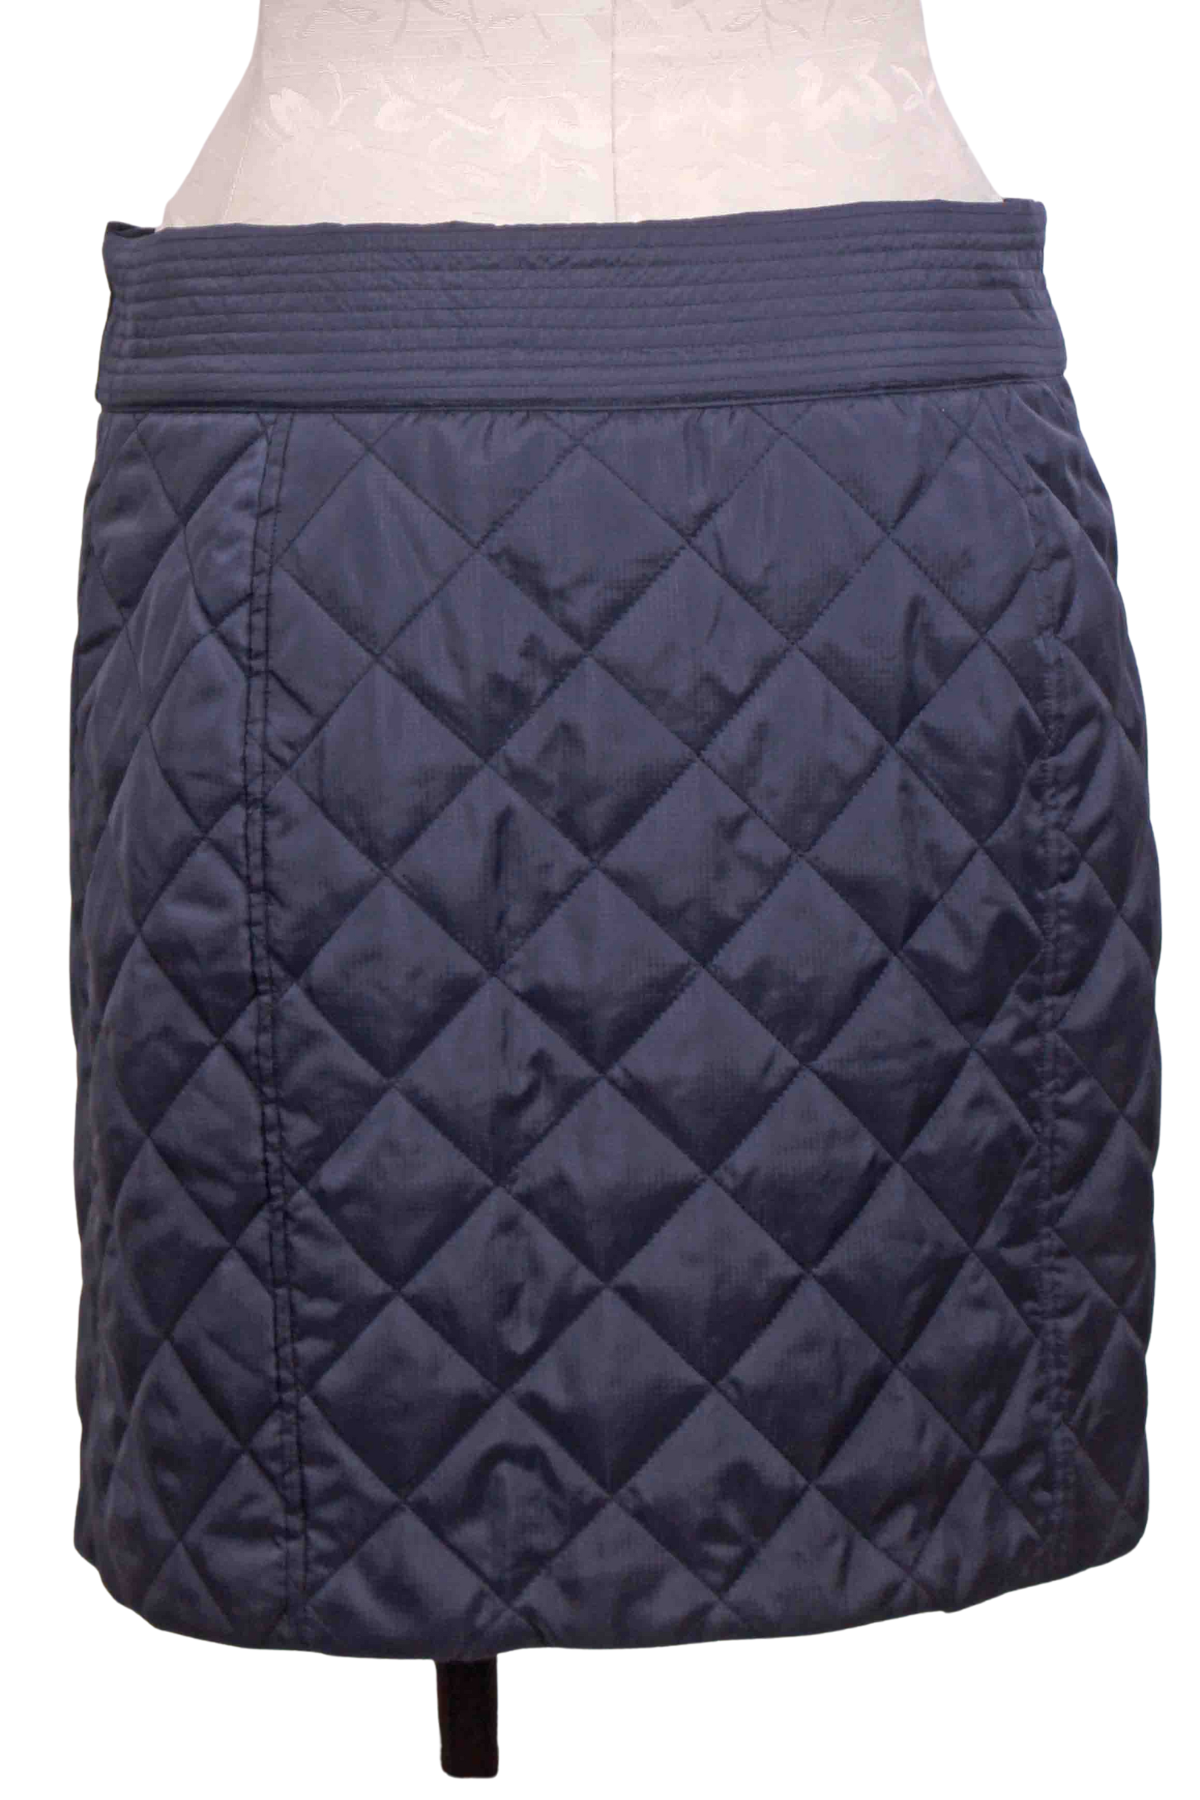 back view of Midnight Navy colored Quilted Jette Skirt by Marie Oliver